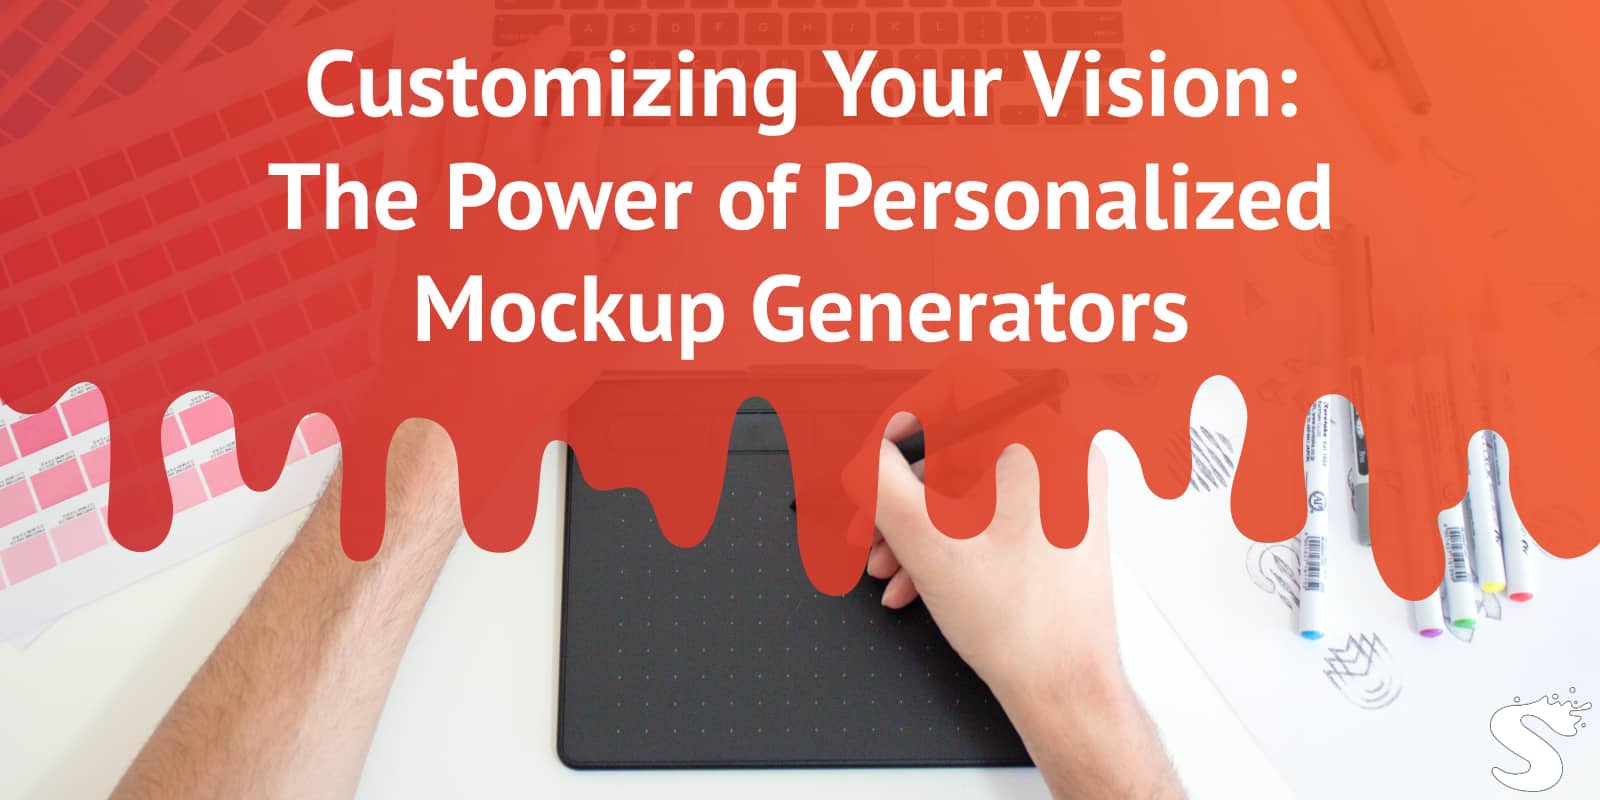 Customizing Your Vision: The Power of Personalized Mockup Generators